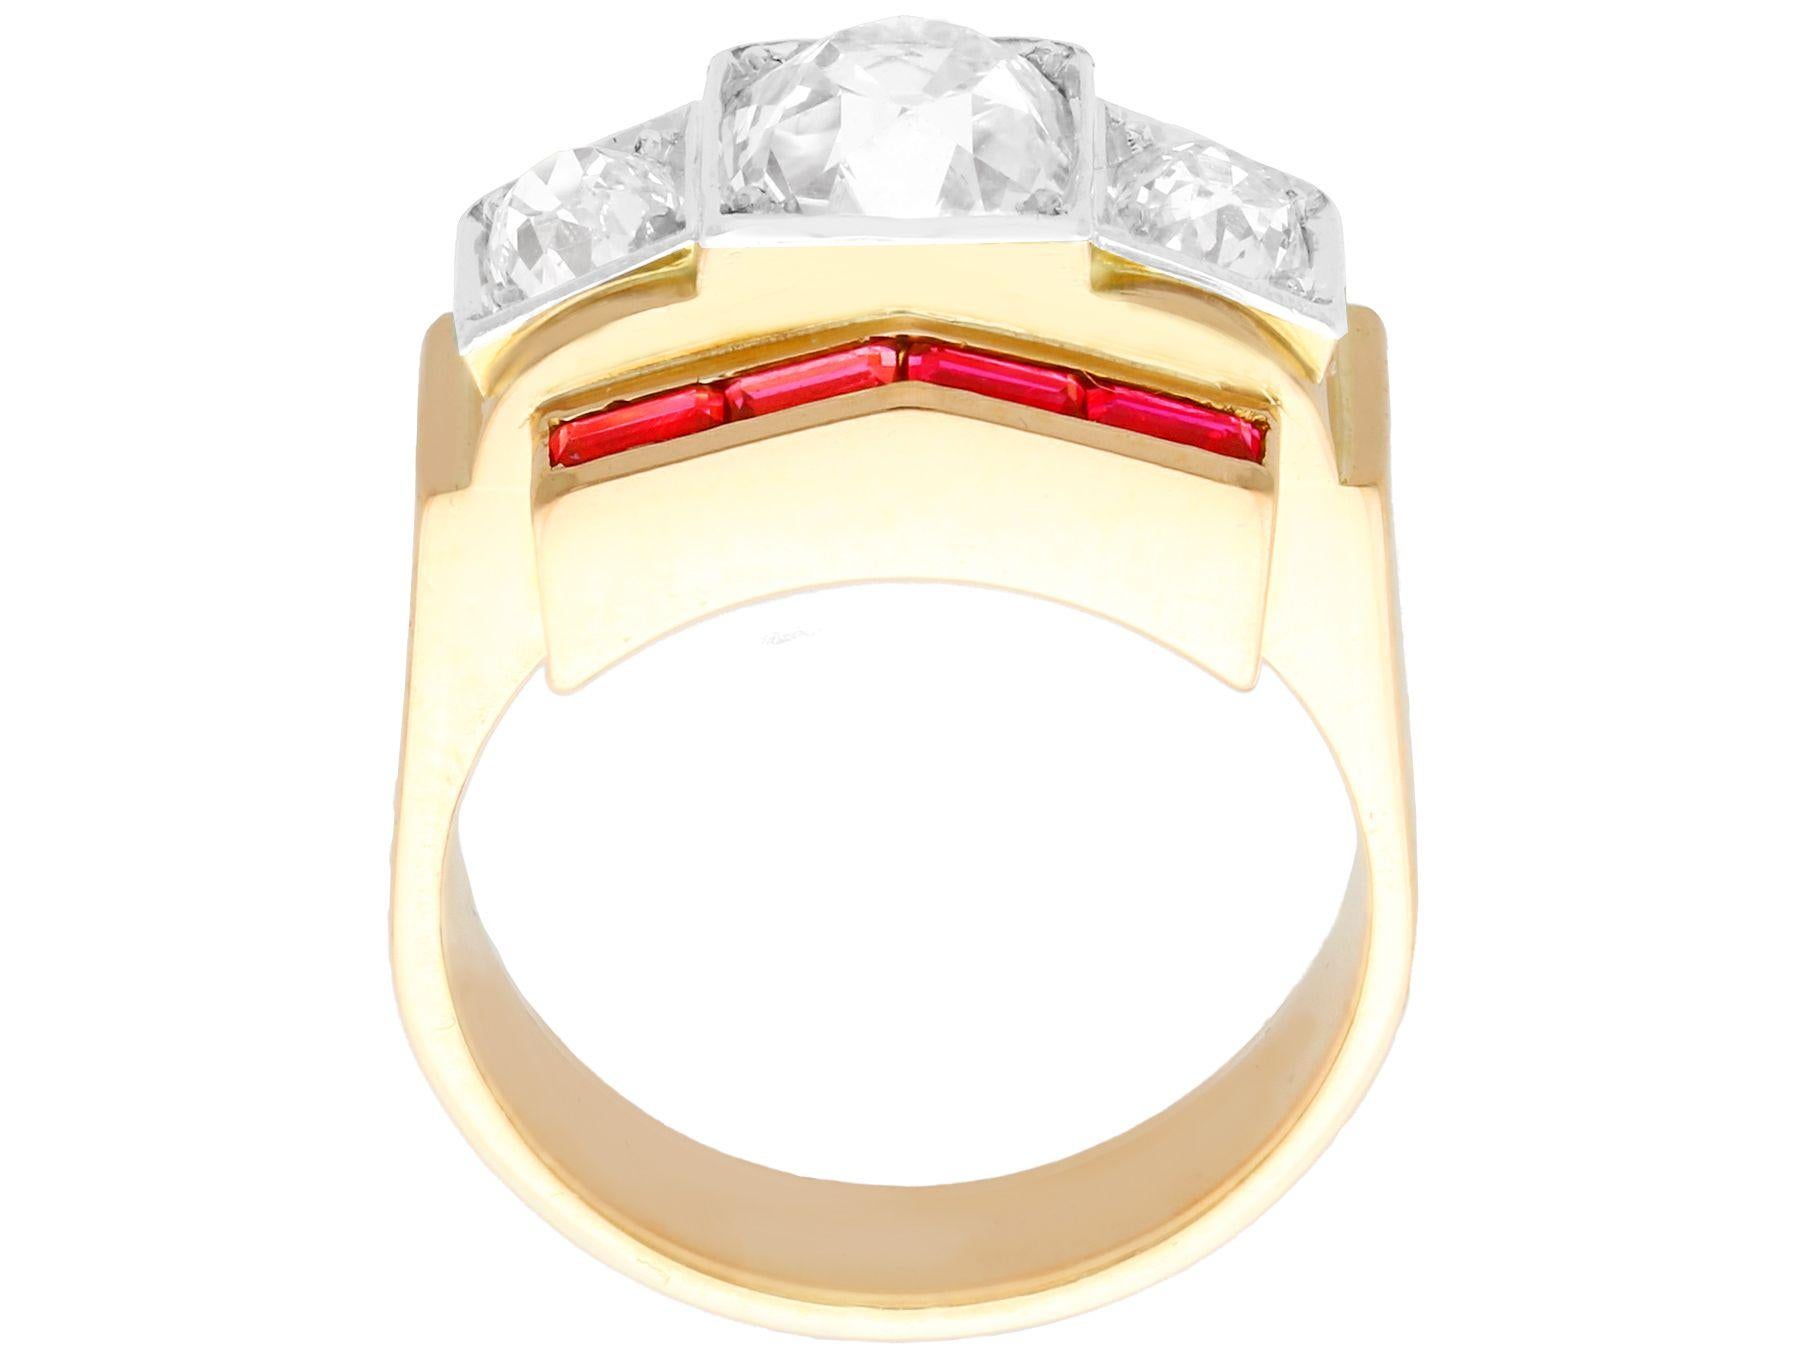 Vintage French 2.28 Carat Diamond and Ruby Yellow Gold Cocktail Ring, circa 1940 In Excellent Condition For Sale In Jesmond, Newcastle Upon Tyne